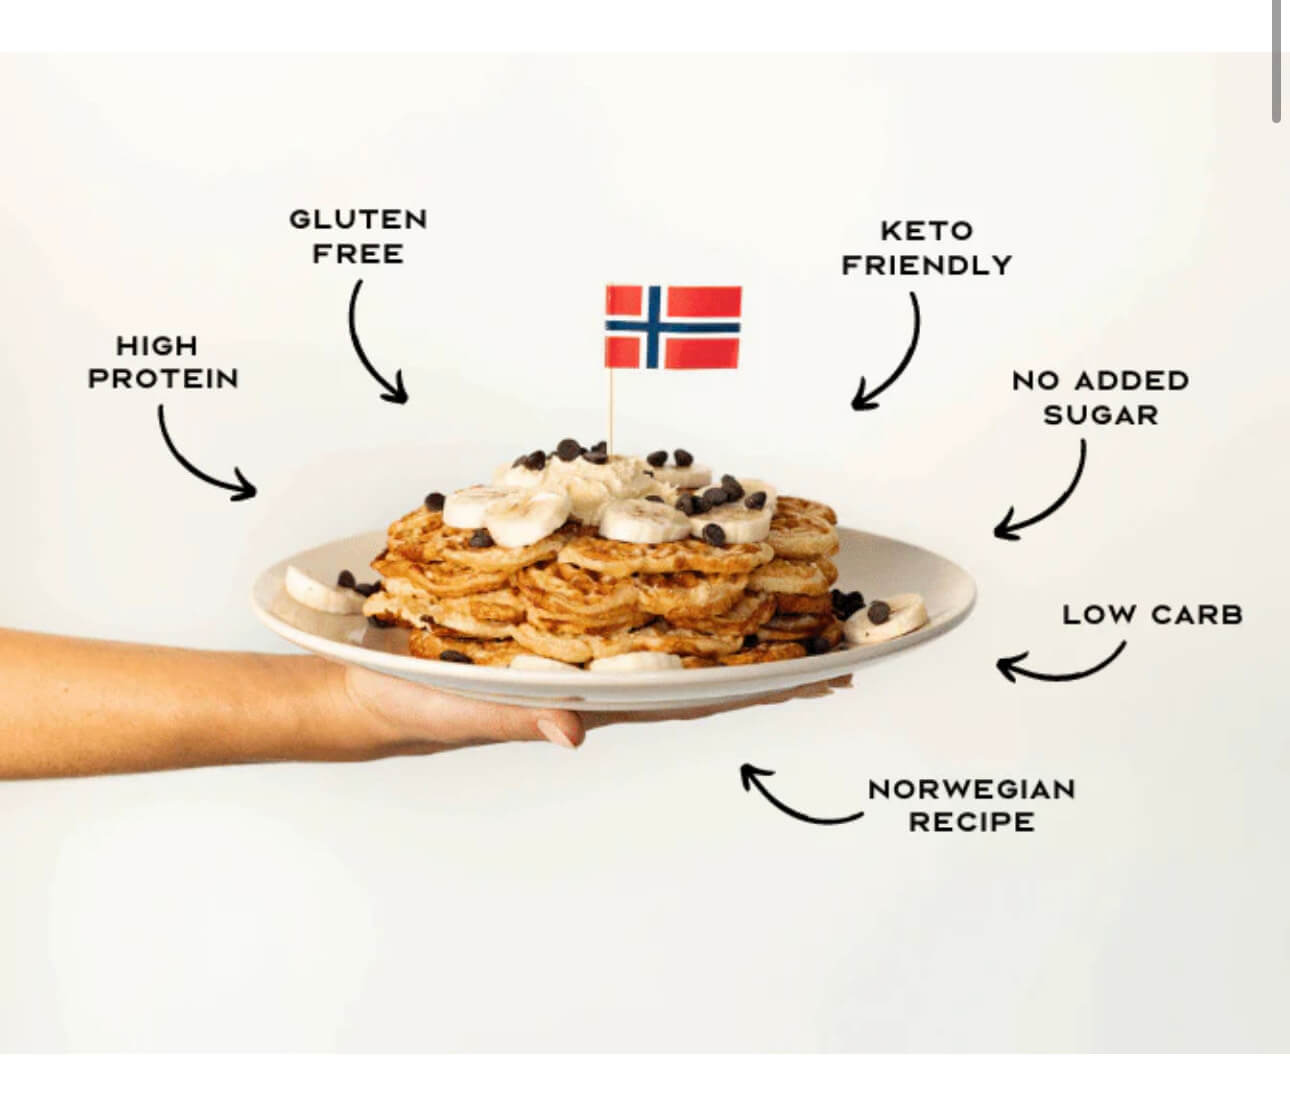 An image showing the value proposition of Viking Waffles.  There is a hand holding a waffle plate topped with bananas, chocolate chips and a small Norwegian flag.  Around the plate are words explaining the product's benefits: high protein, gluten-free, keto-friendly, no added sugar, low-fat and Norwegian recipe. 